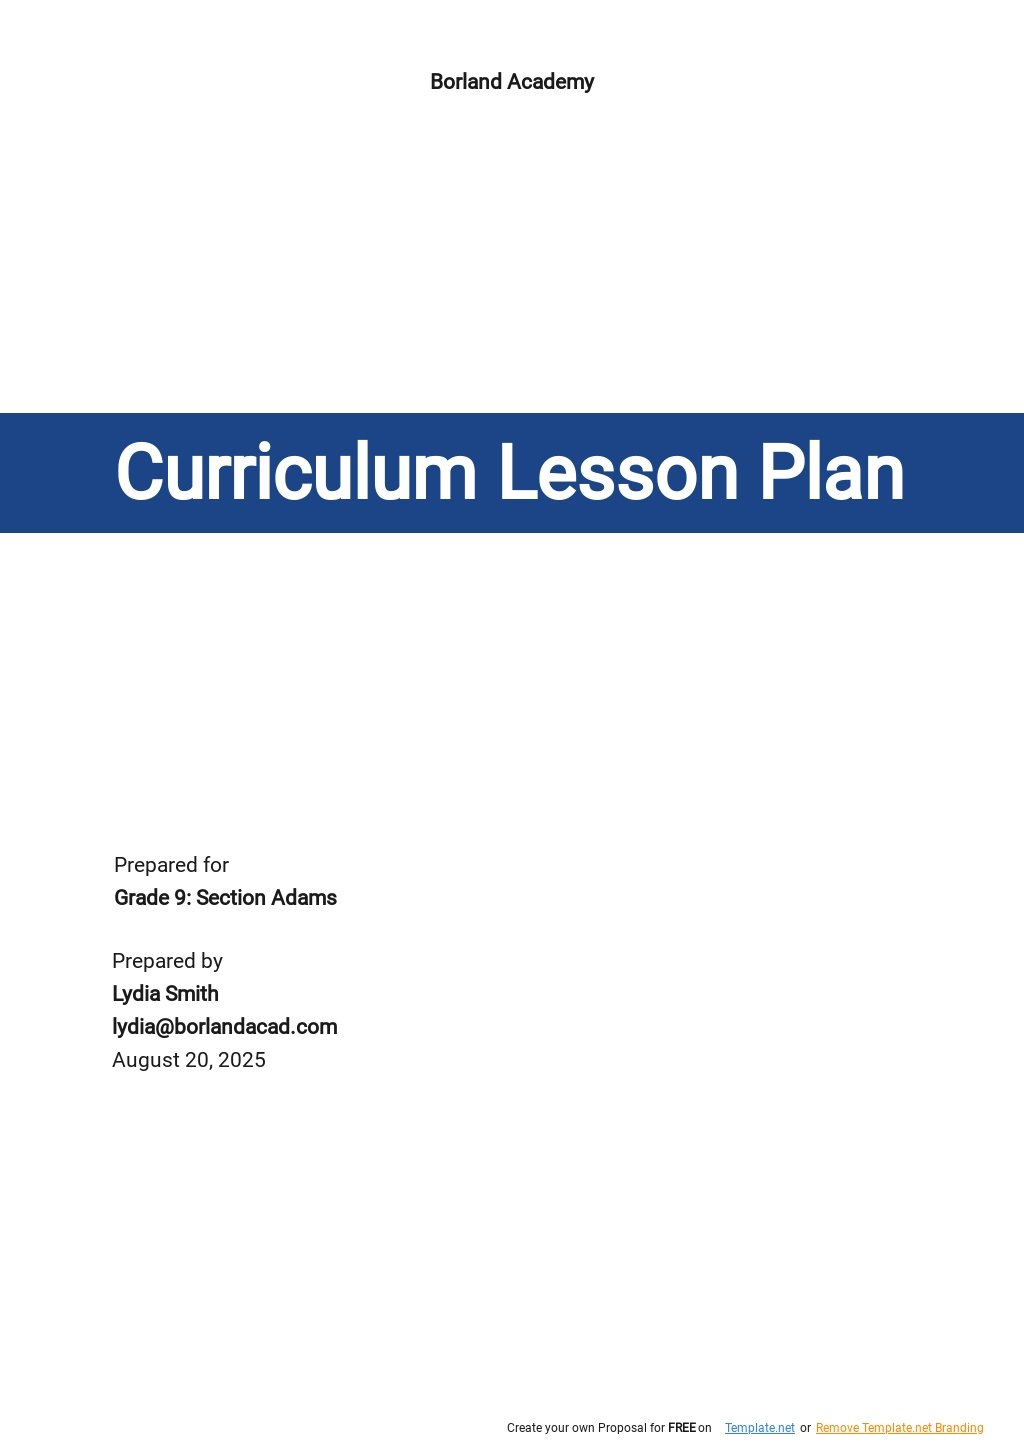 Free Simple Curriculum Lesson Plan Template.jpe